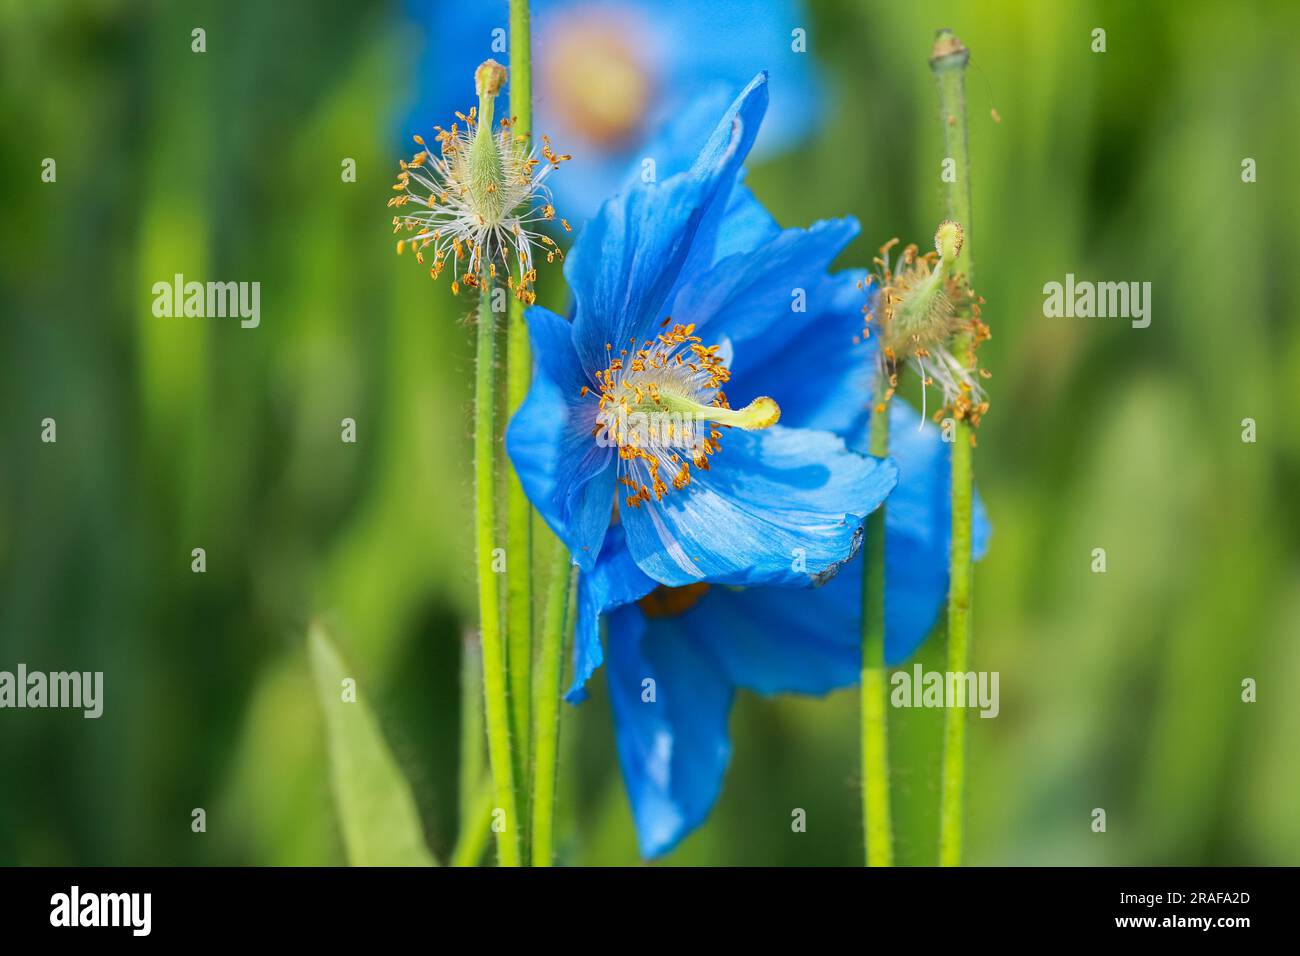 Blooming plant Meconopsis Grandis on the green background Stock Photo